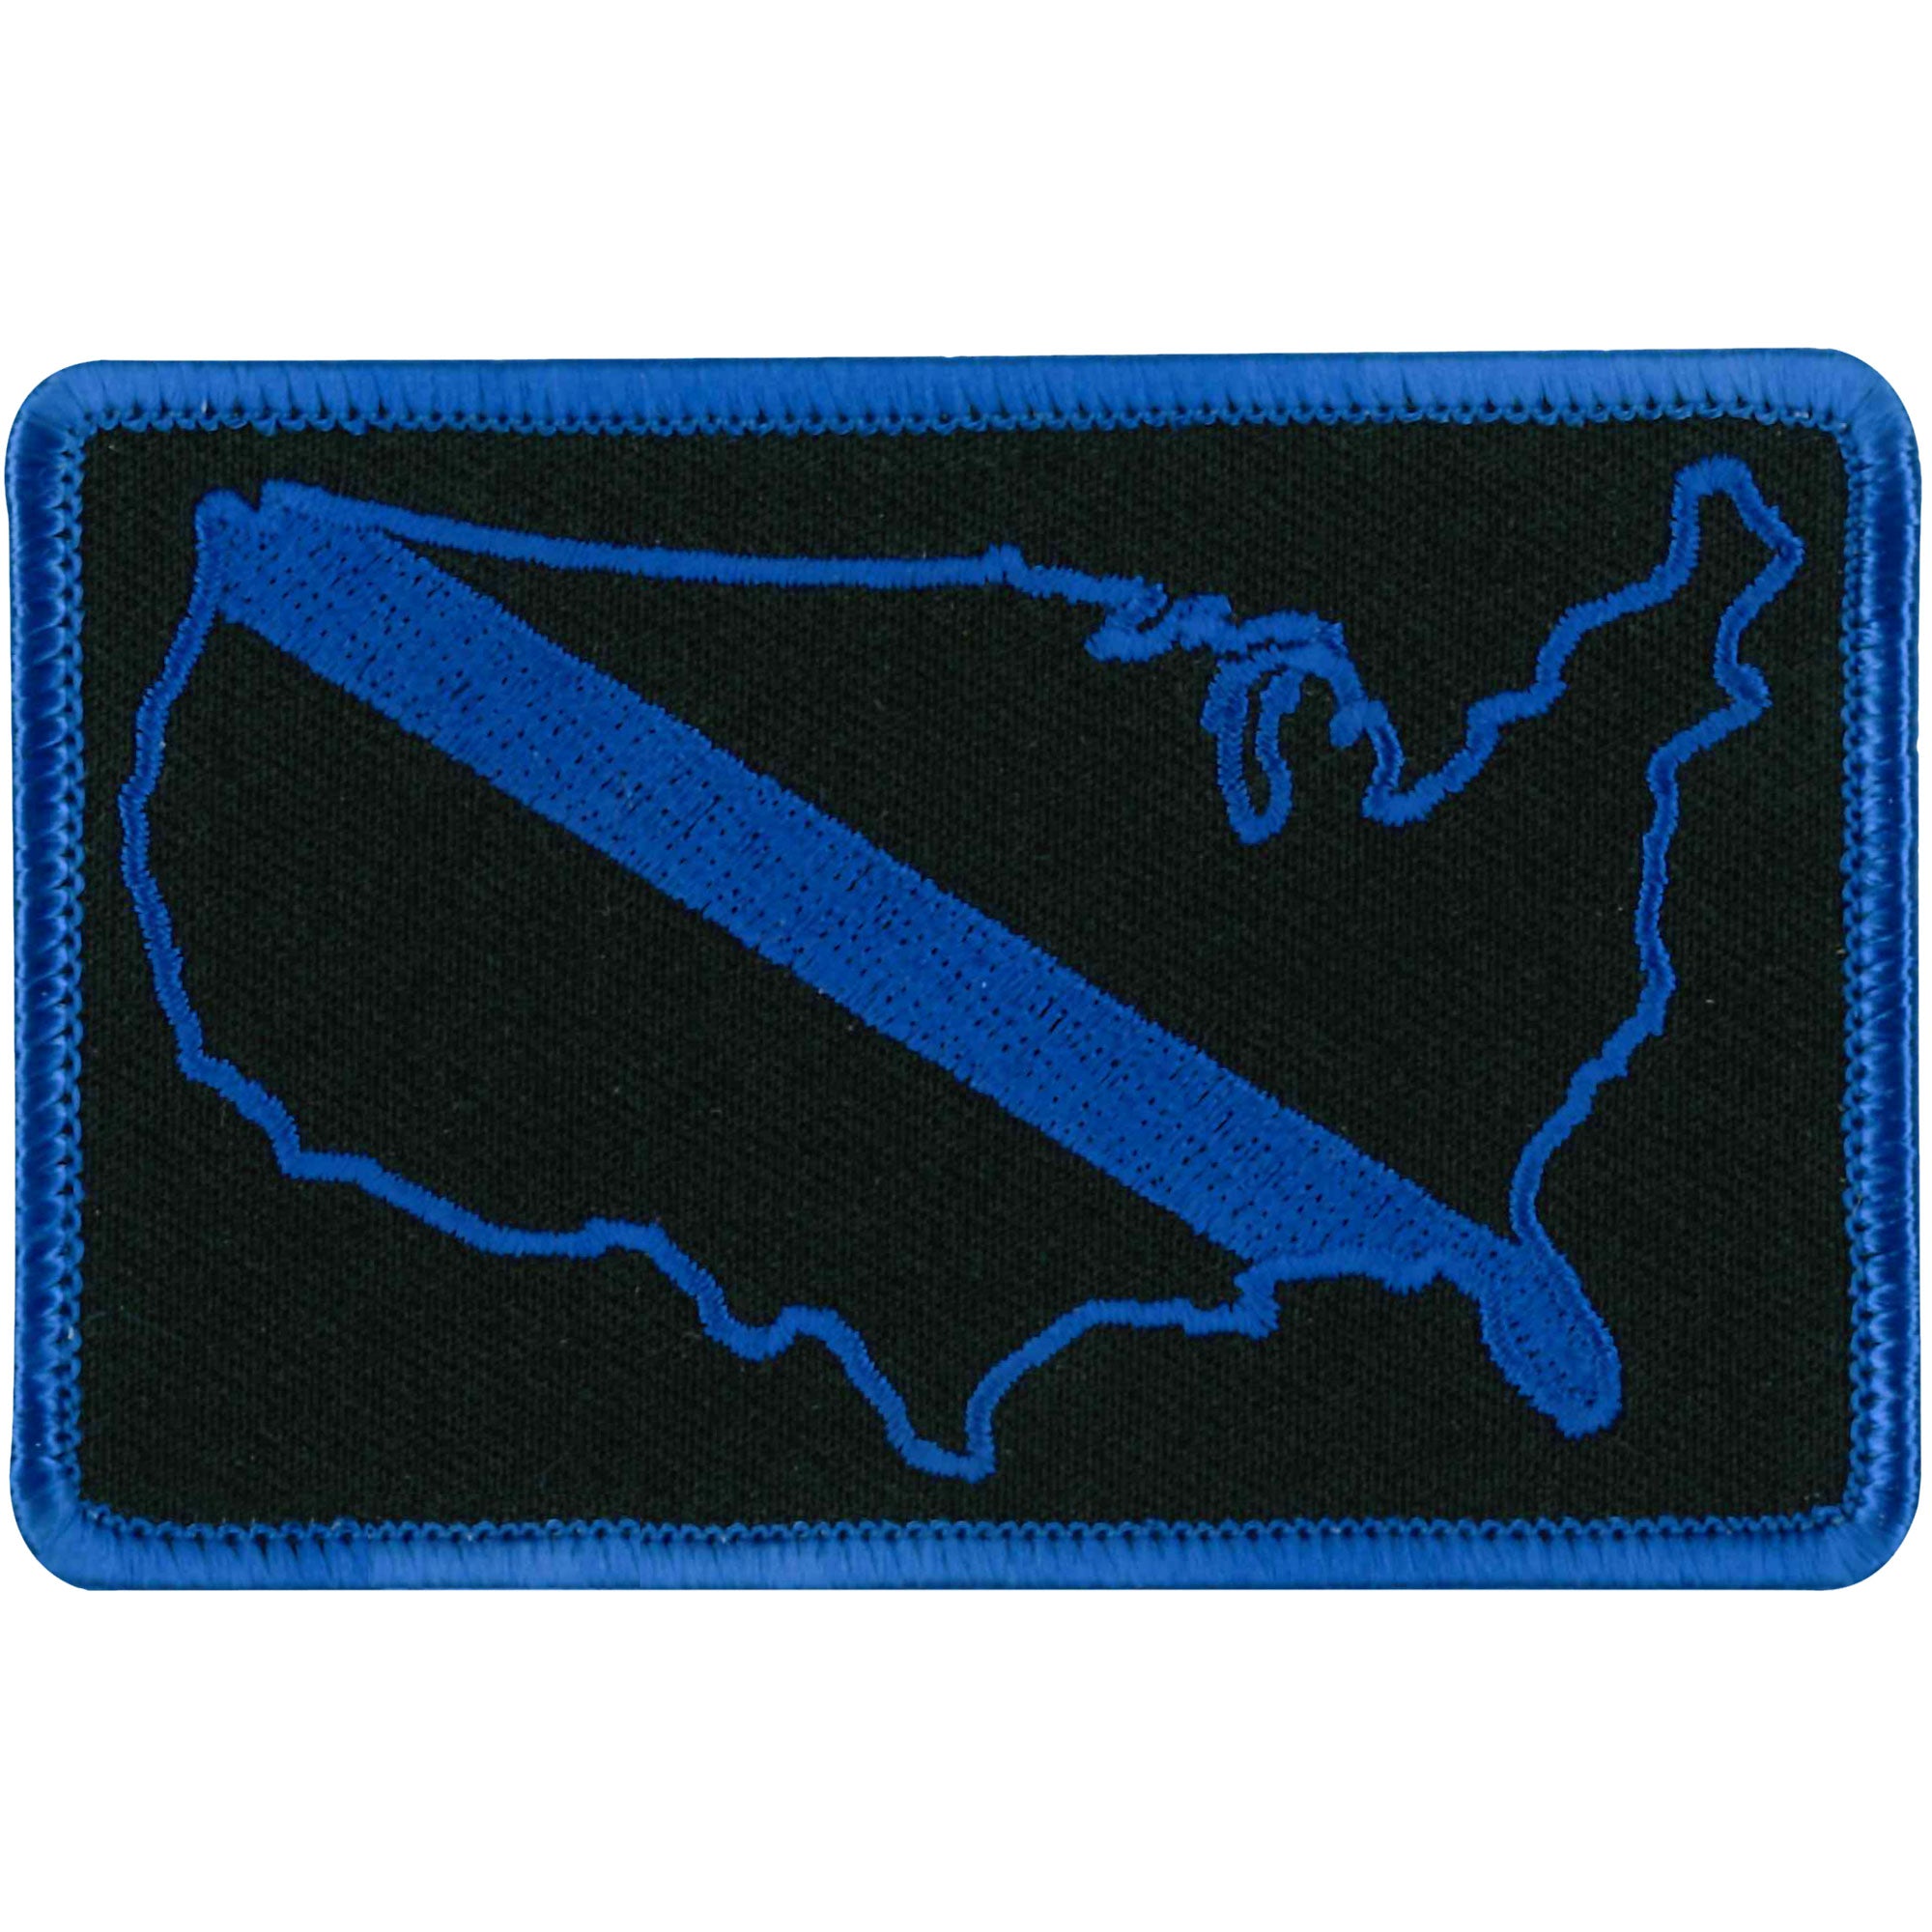 PATCH USA FALLEN POLICE